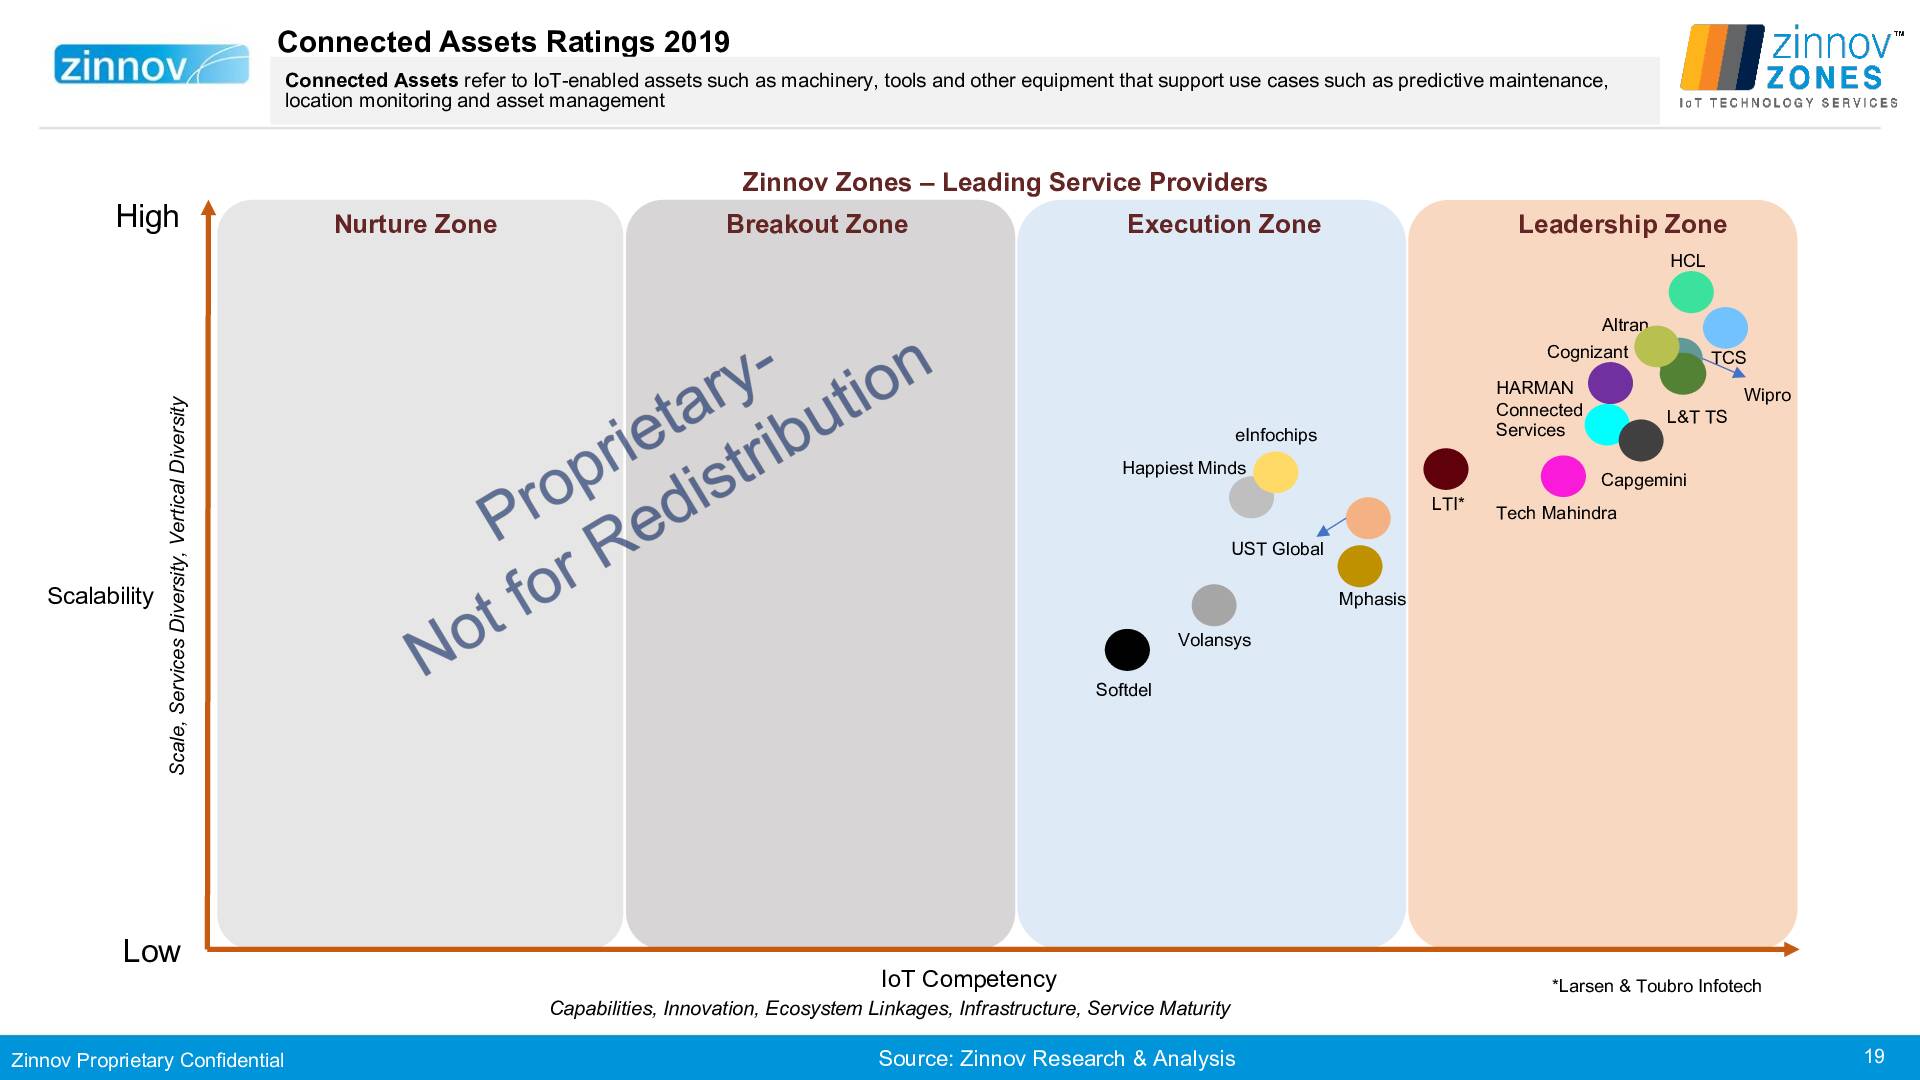 Zinnov Zones Iot Technology Services 2019 Ratings19